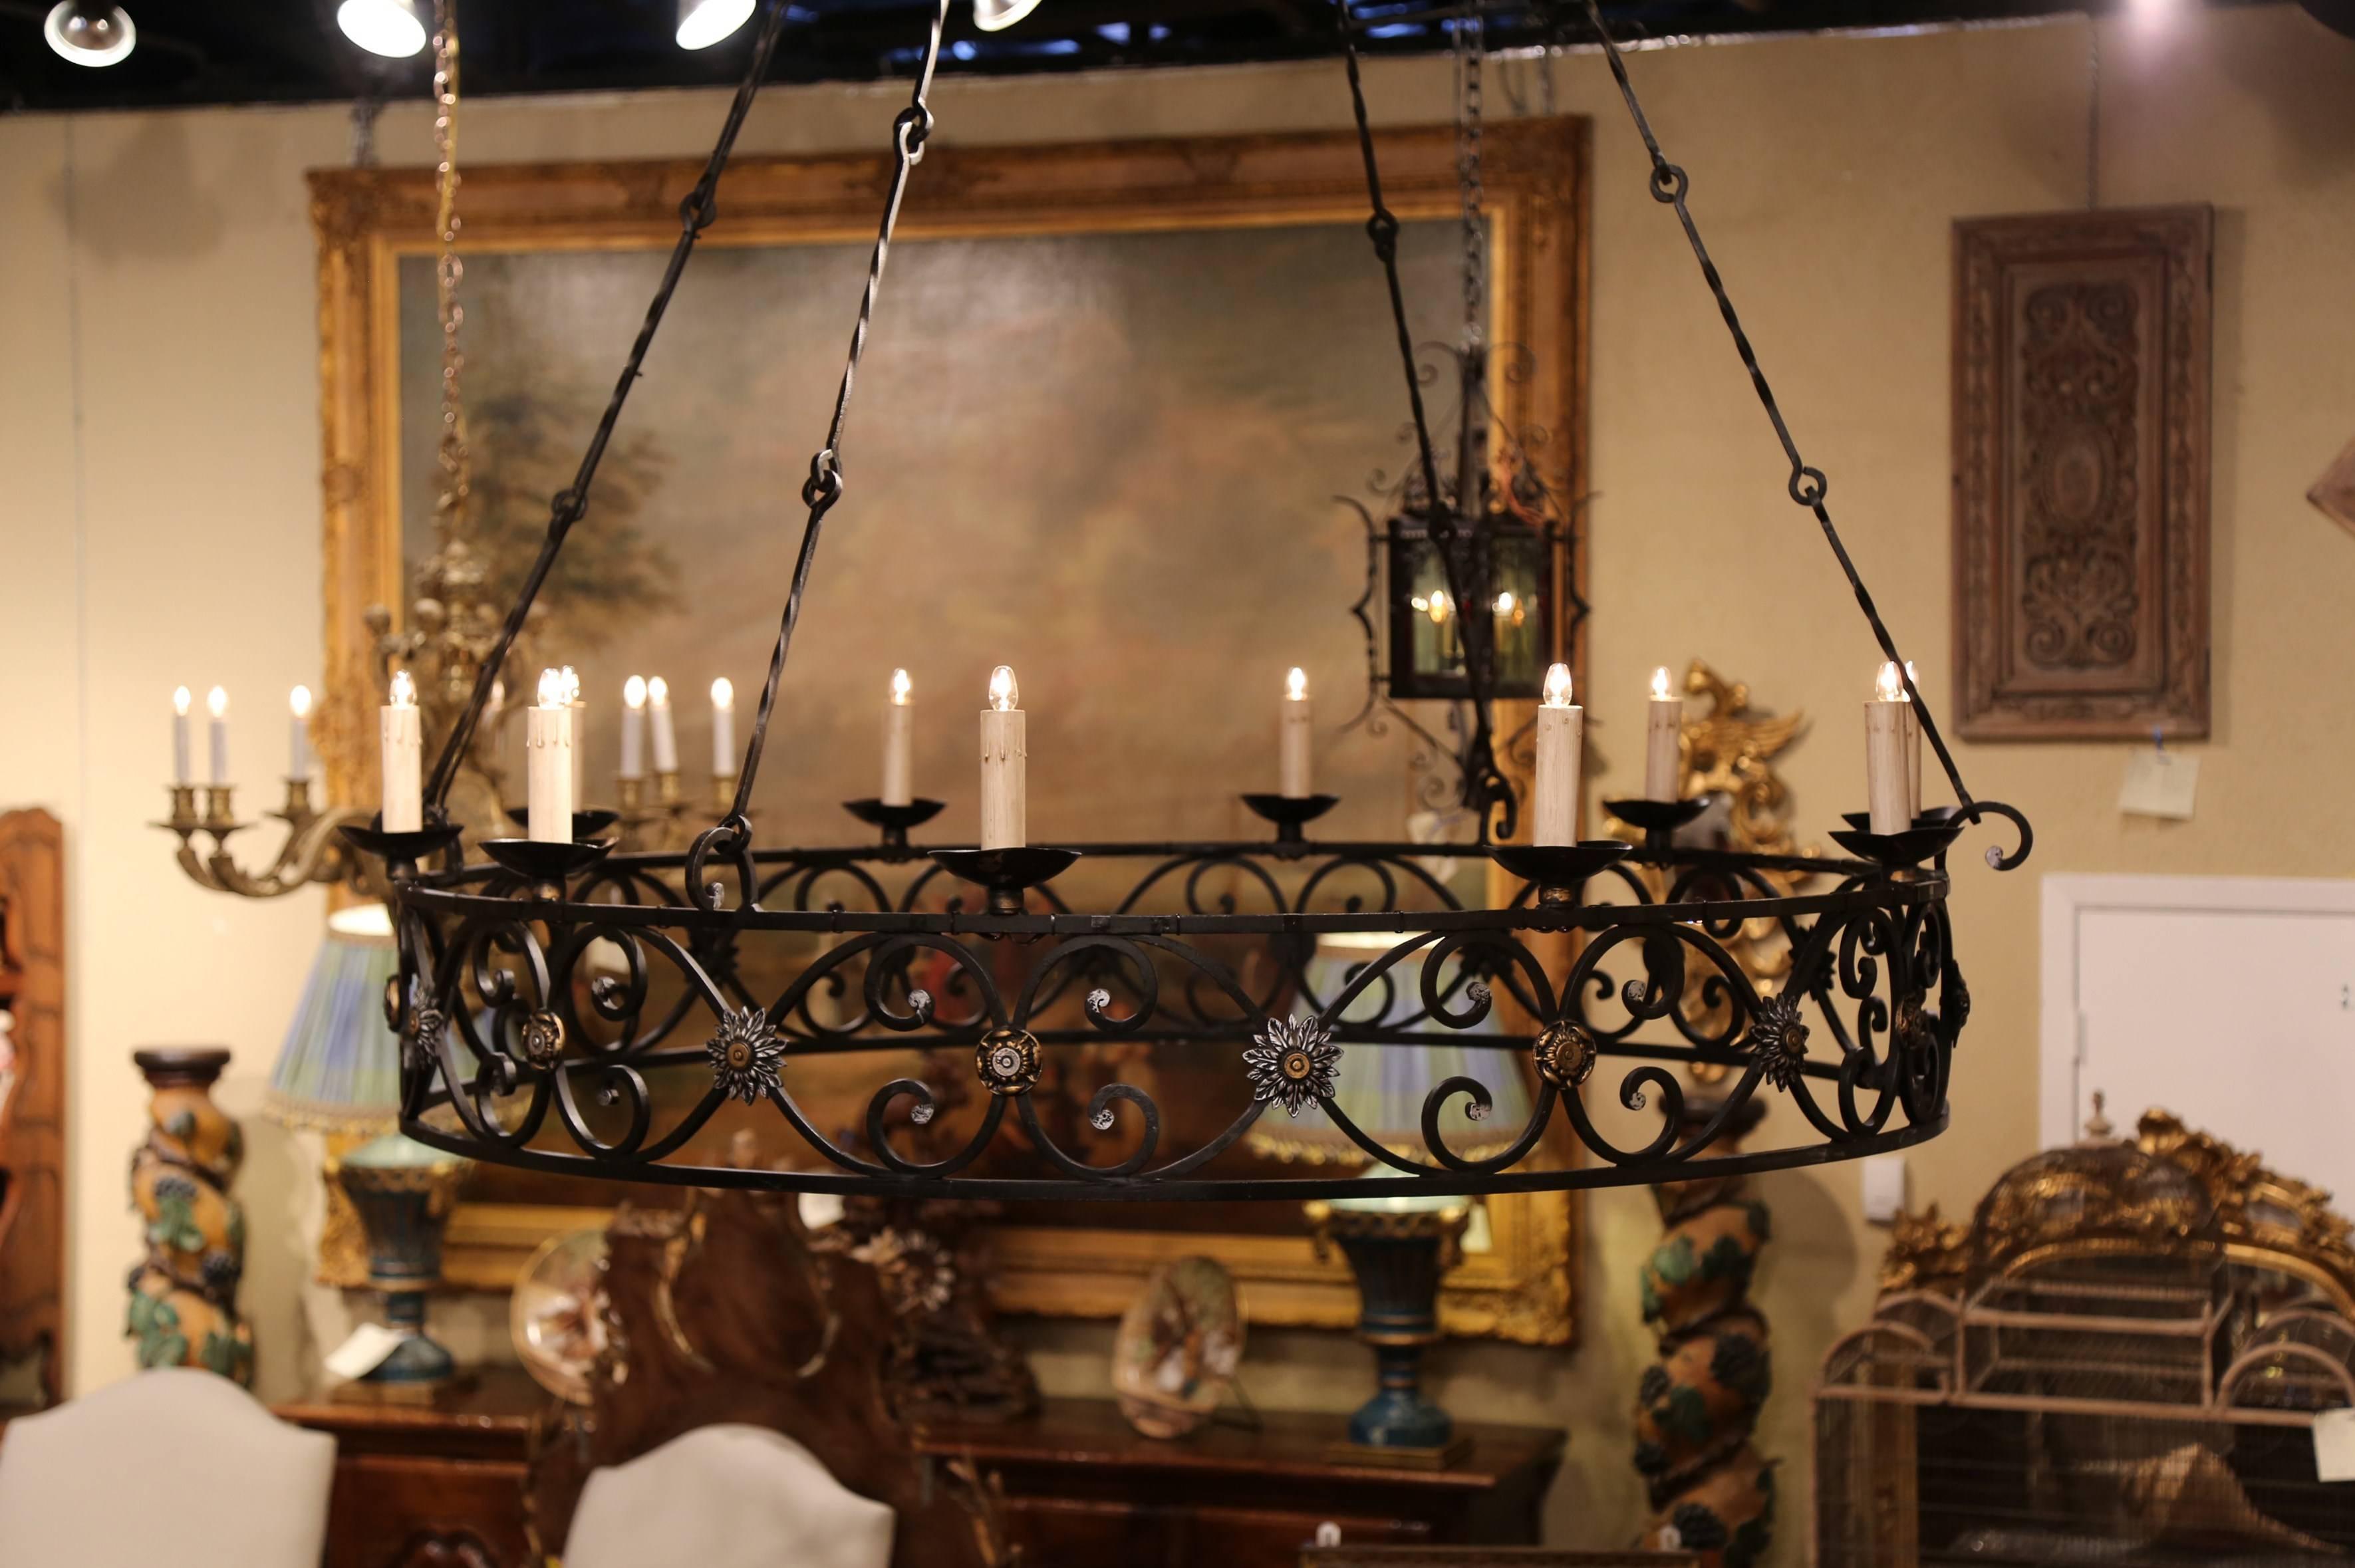  Large Early 20th Century French Iron Ten-Light Round Chandelier from Normandy 1